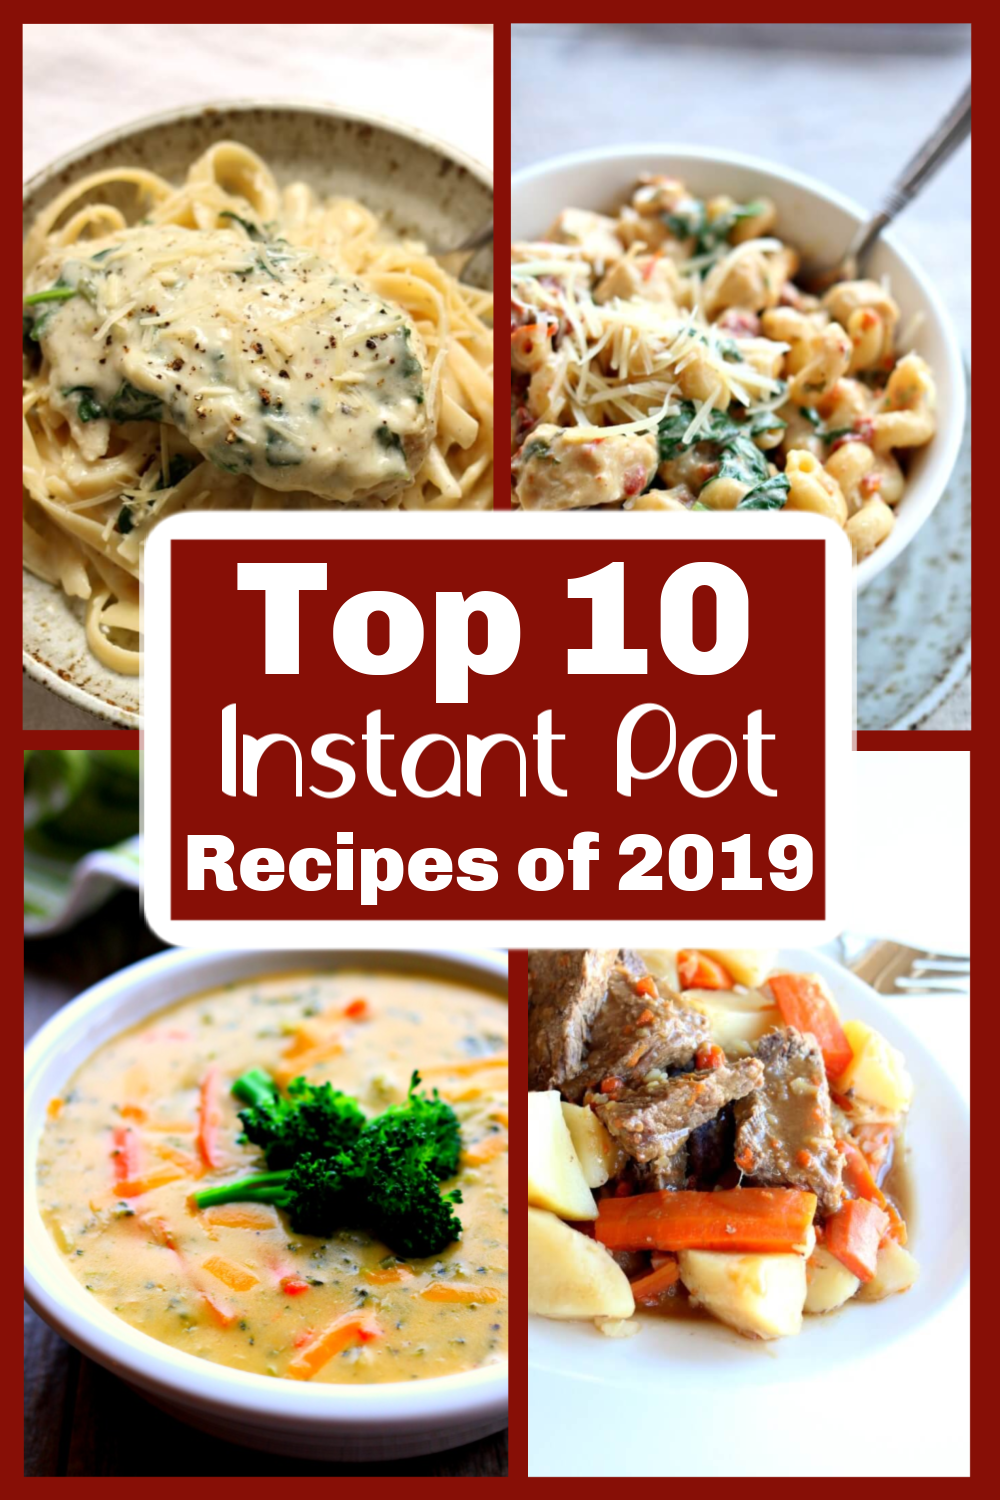 Top 10 Instant Pot Recipes of 2019 - 365 Days of Slow ...